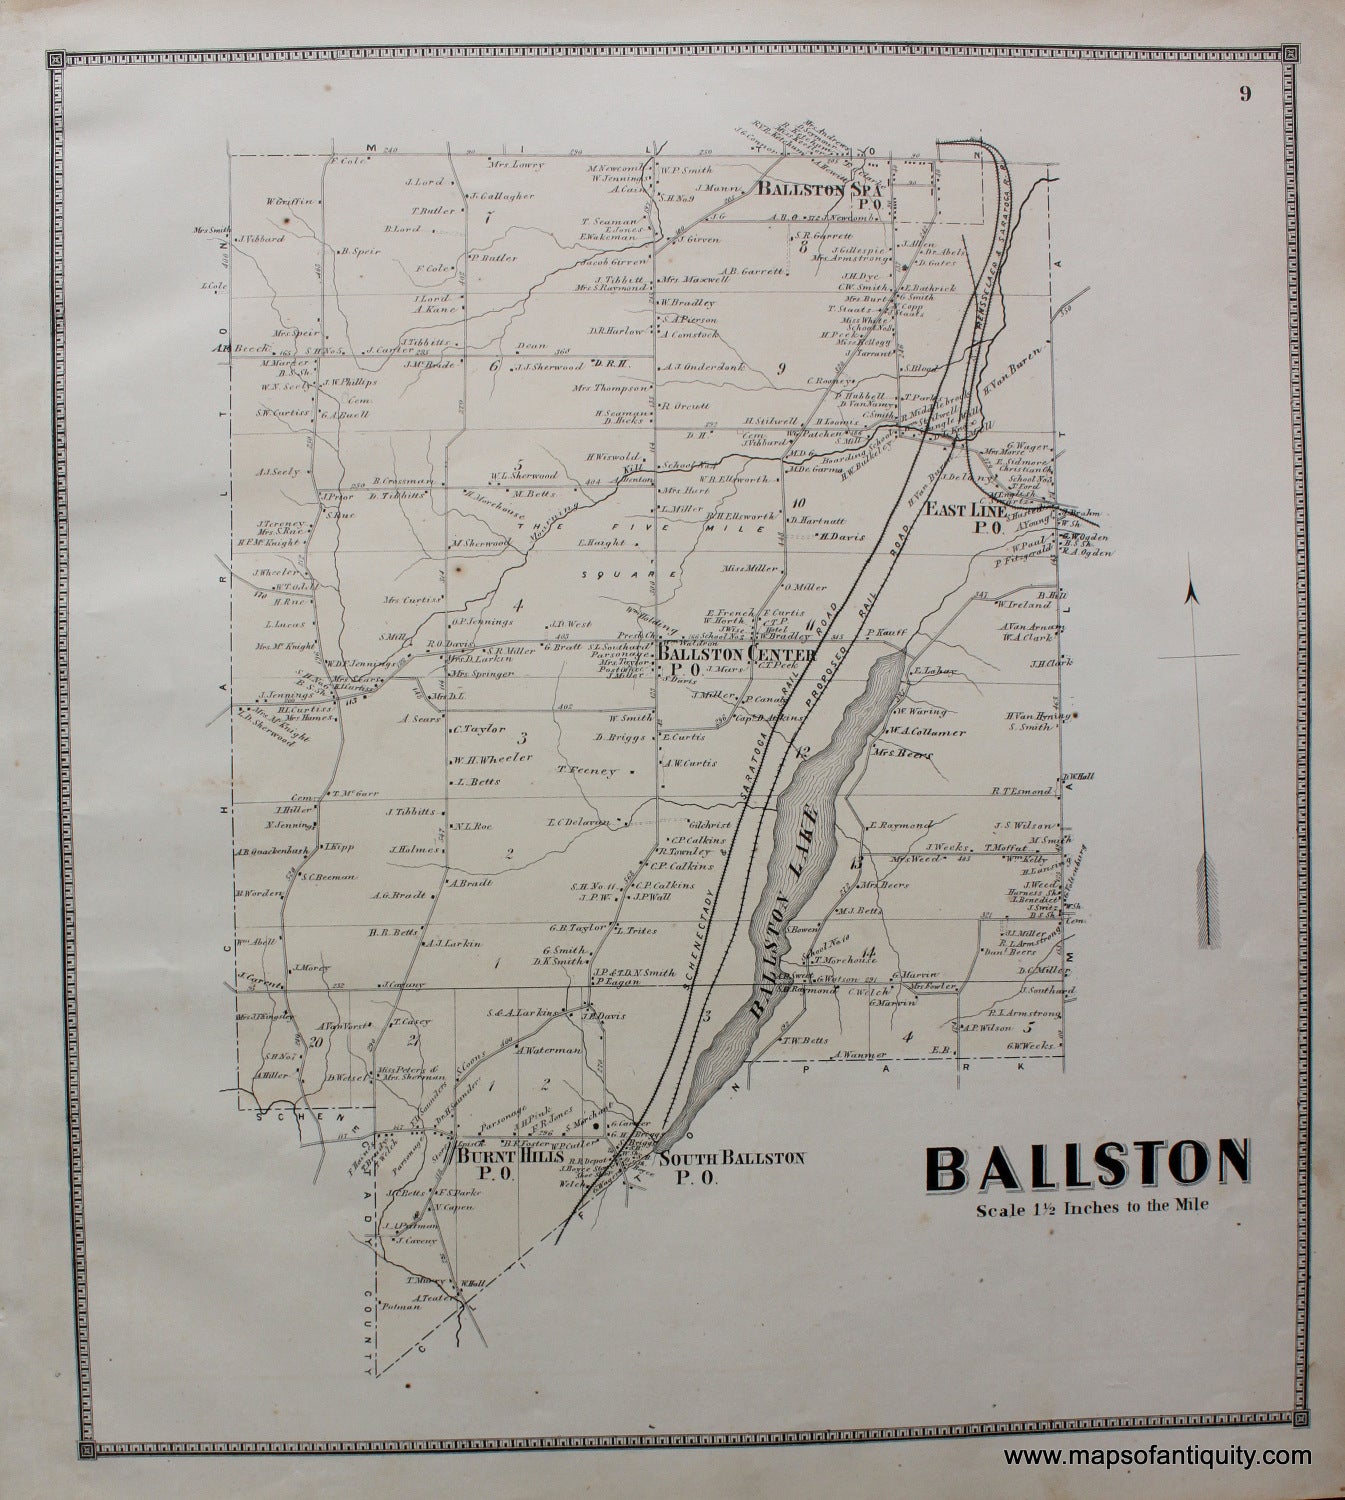 Hand-Colored-Engraved-Antique-Map-Ballston-Ballston-Spa-New-York-United-States-Northeast-1866-Stone-and-Stewart-Maps-Of-Antiquity